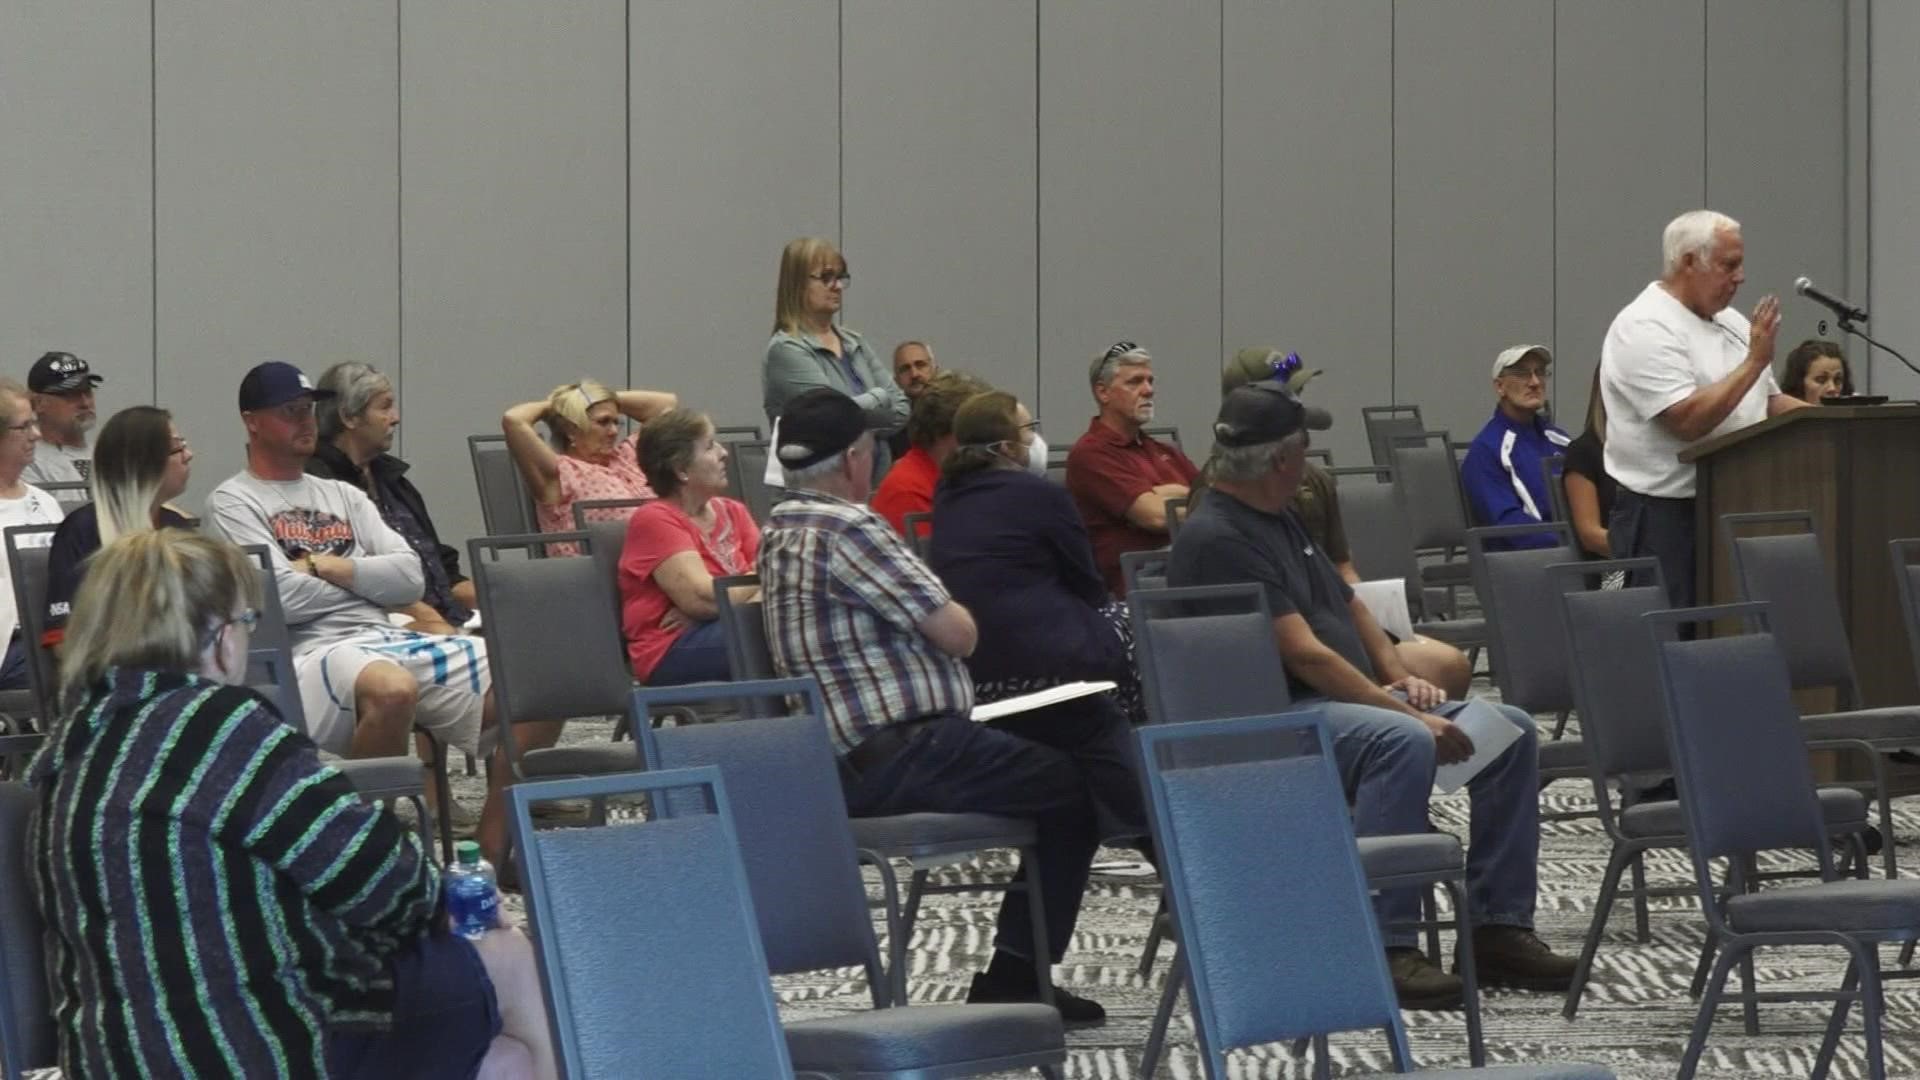 About 50 Muskegon County residents showed up to the VanDyk Mortgage Convention Center with a common mindset on possible drain repairs.